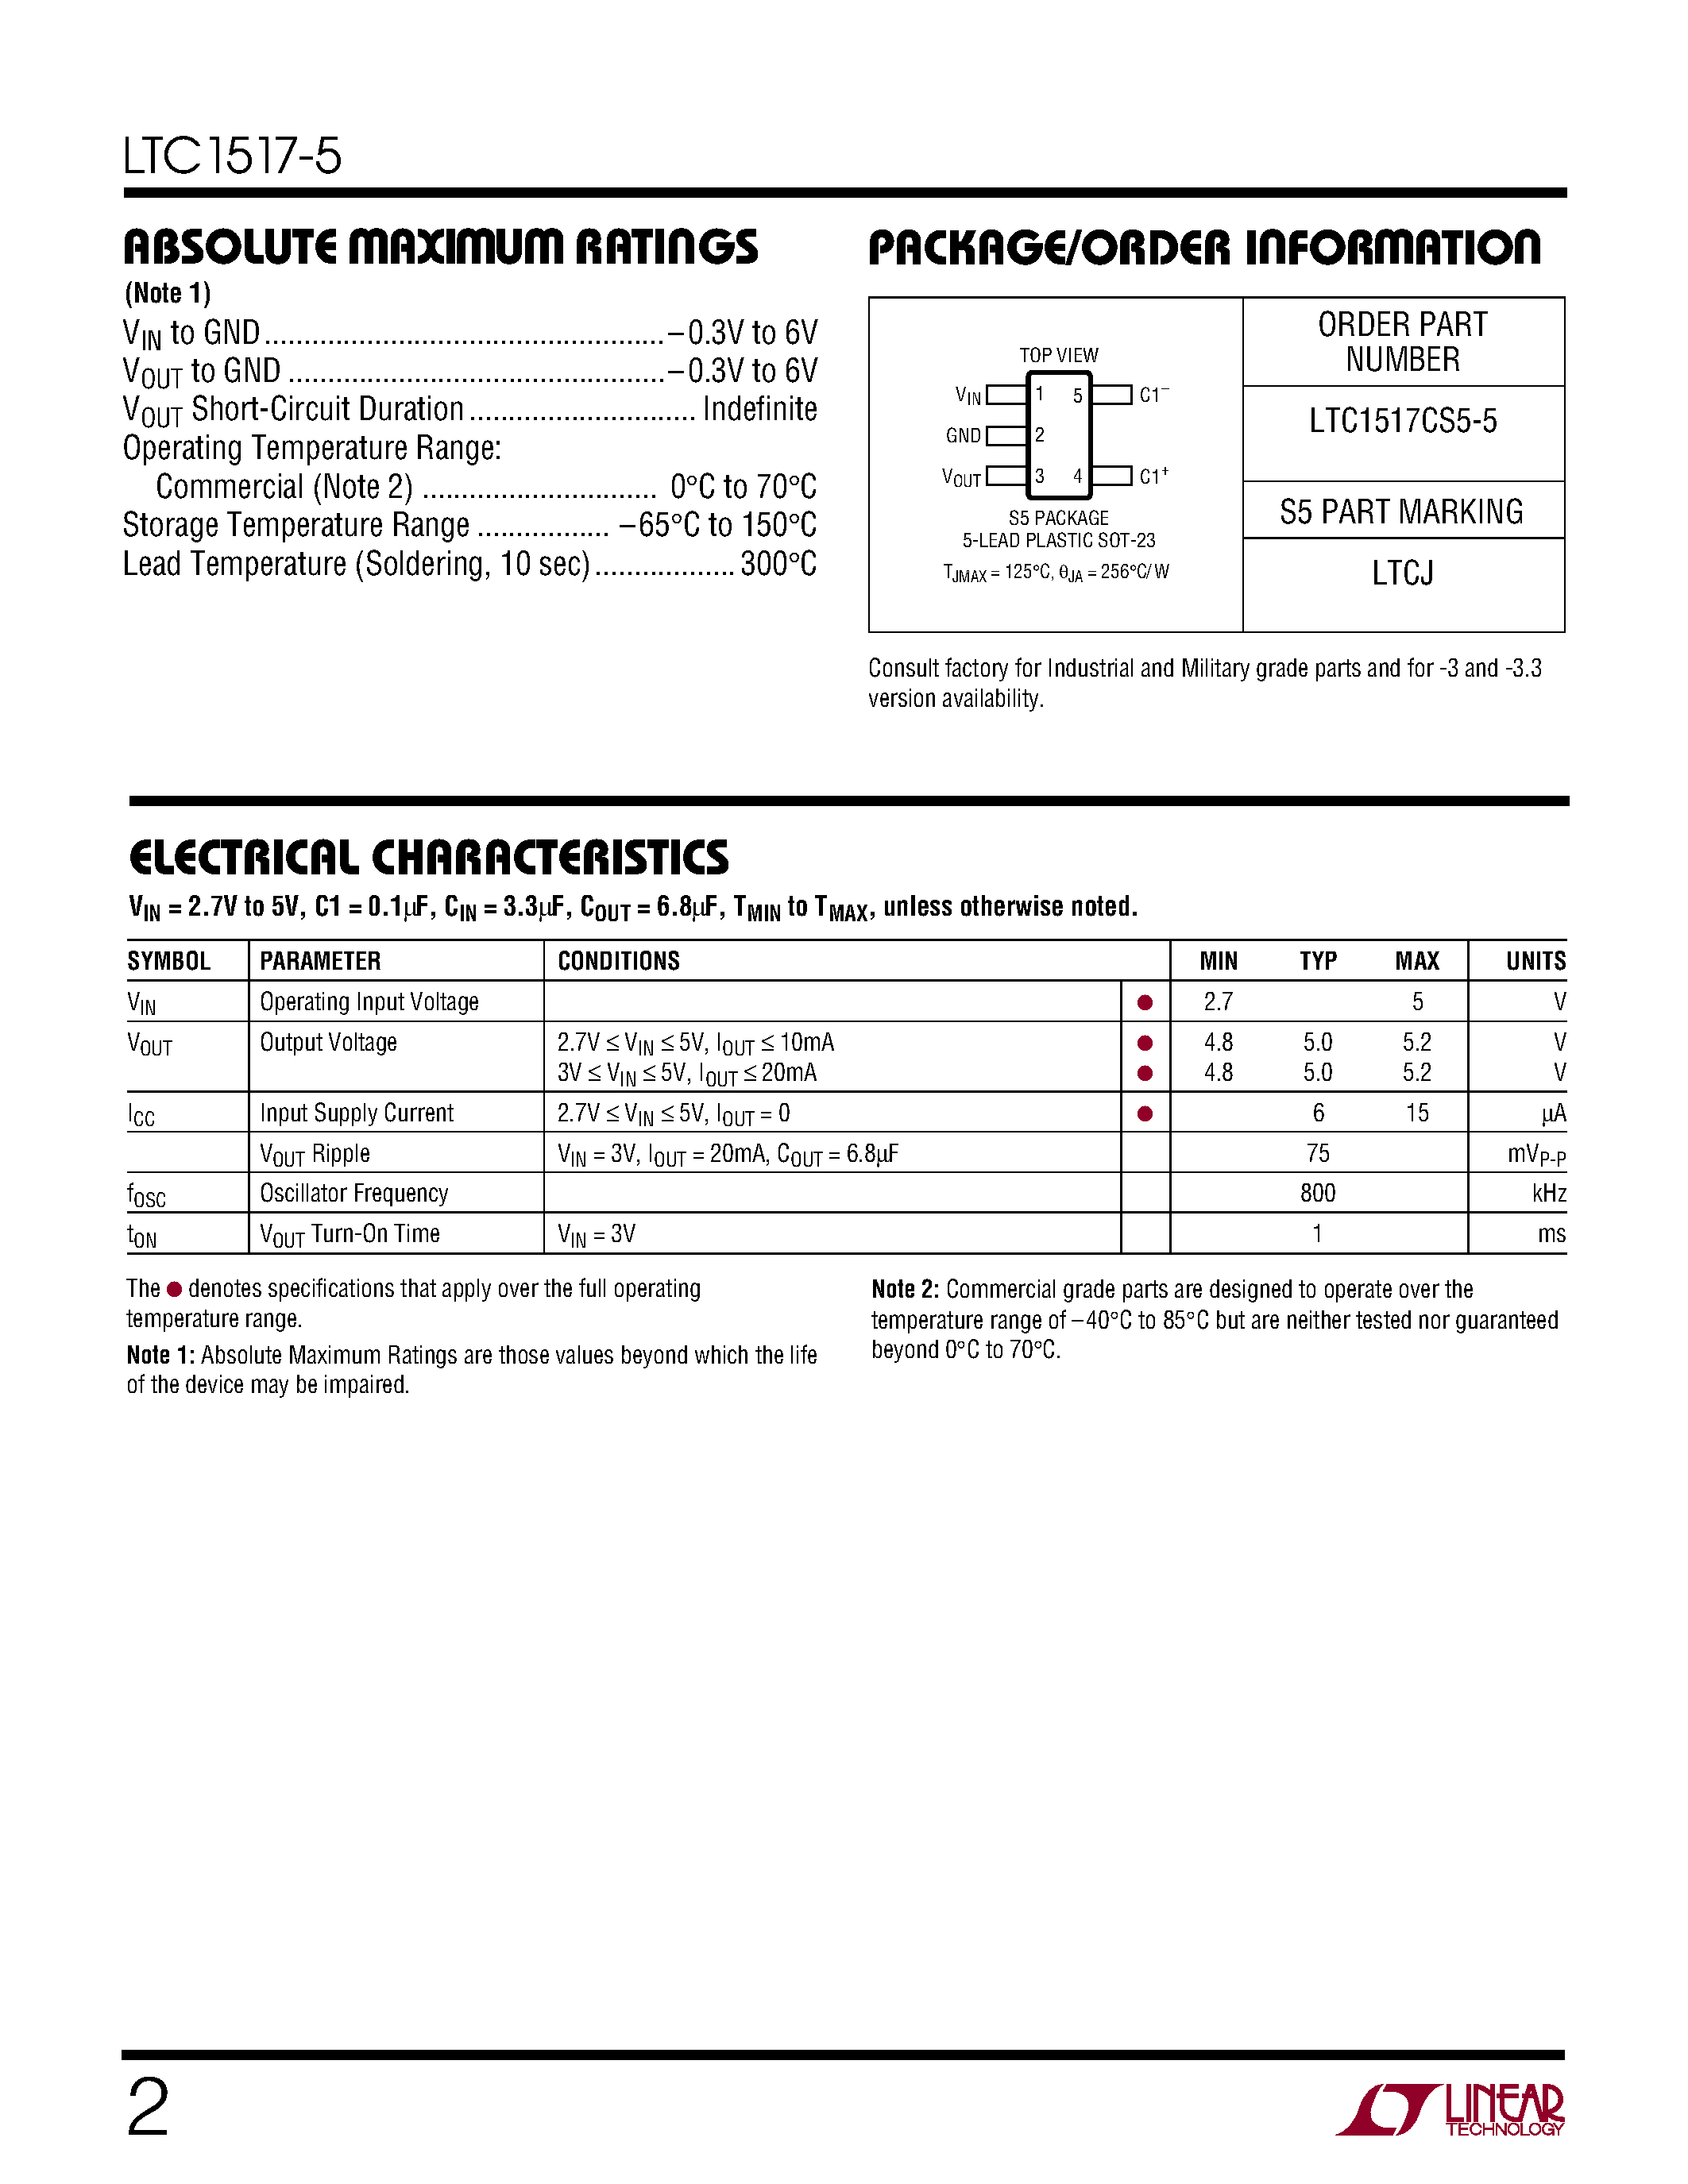 Datasheet LTC1517CS5-5 - Micropower/ Regulated 5V Charge Pump in a 5-Pin SOT-23 Package page 2